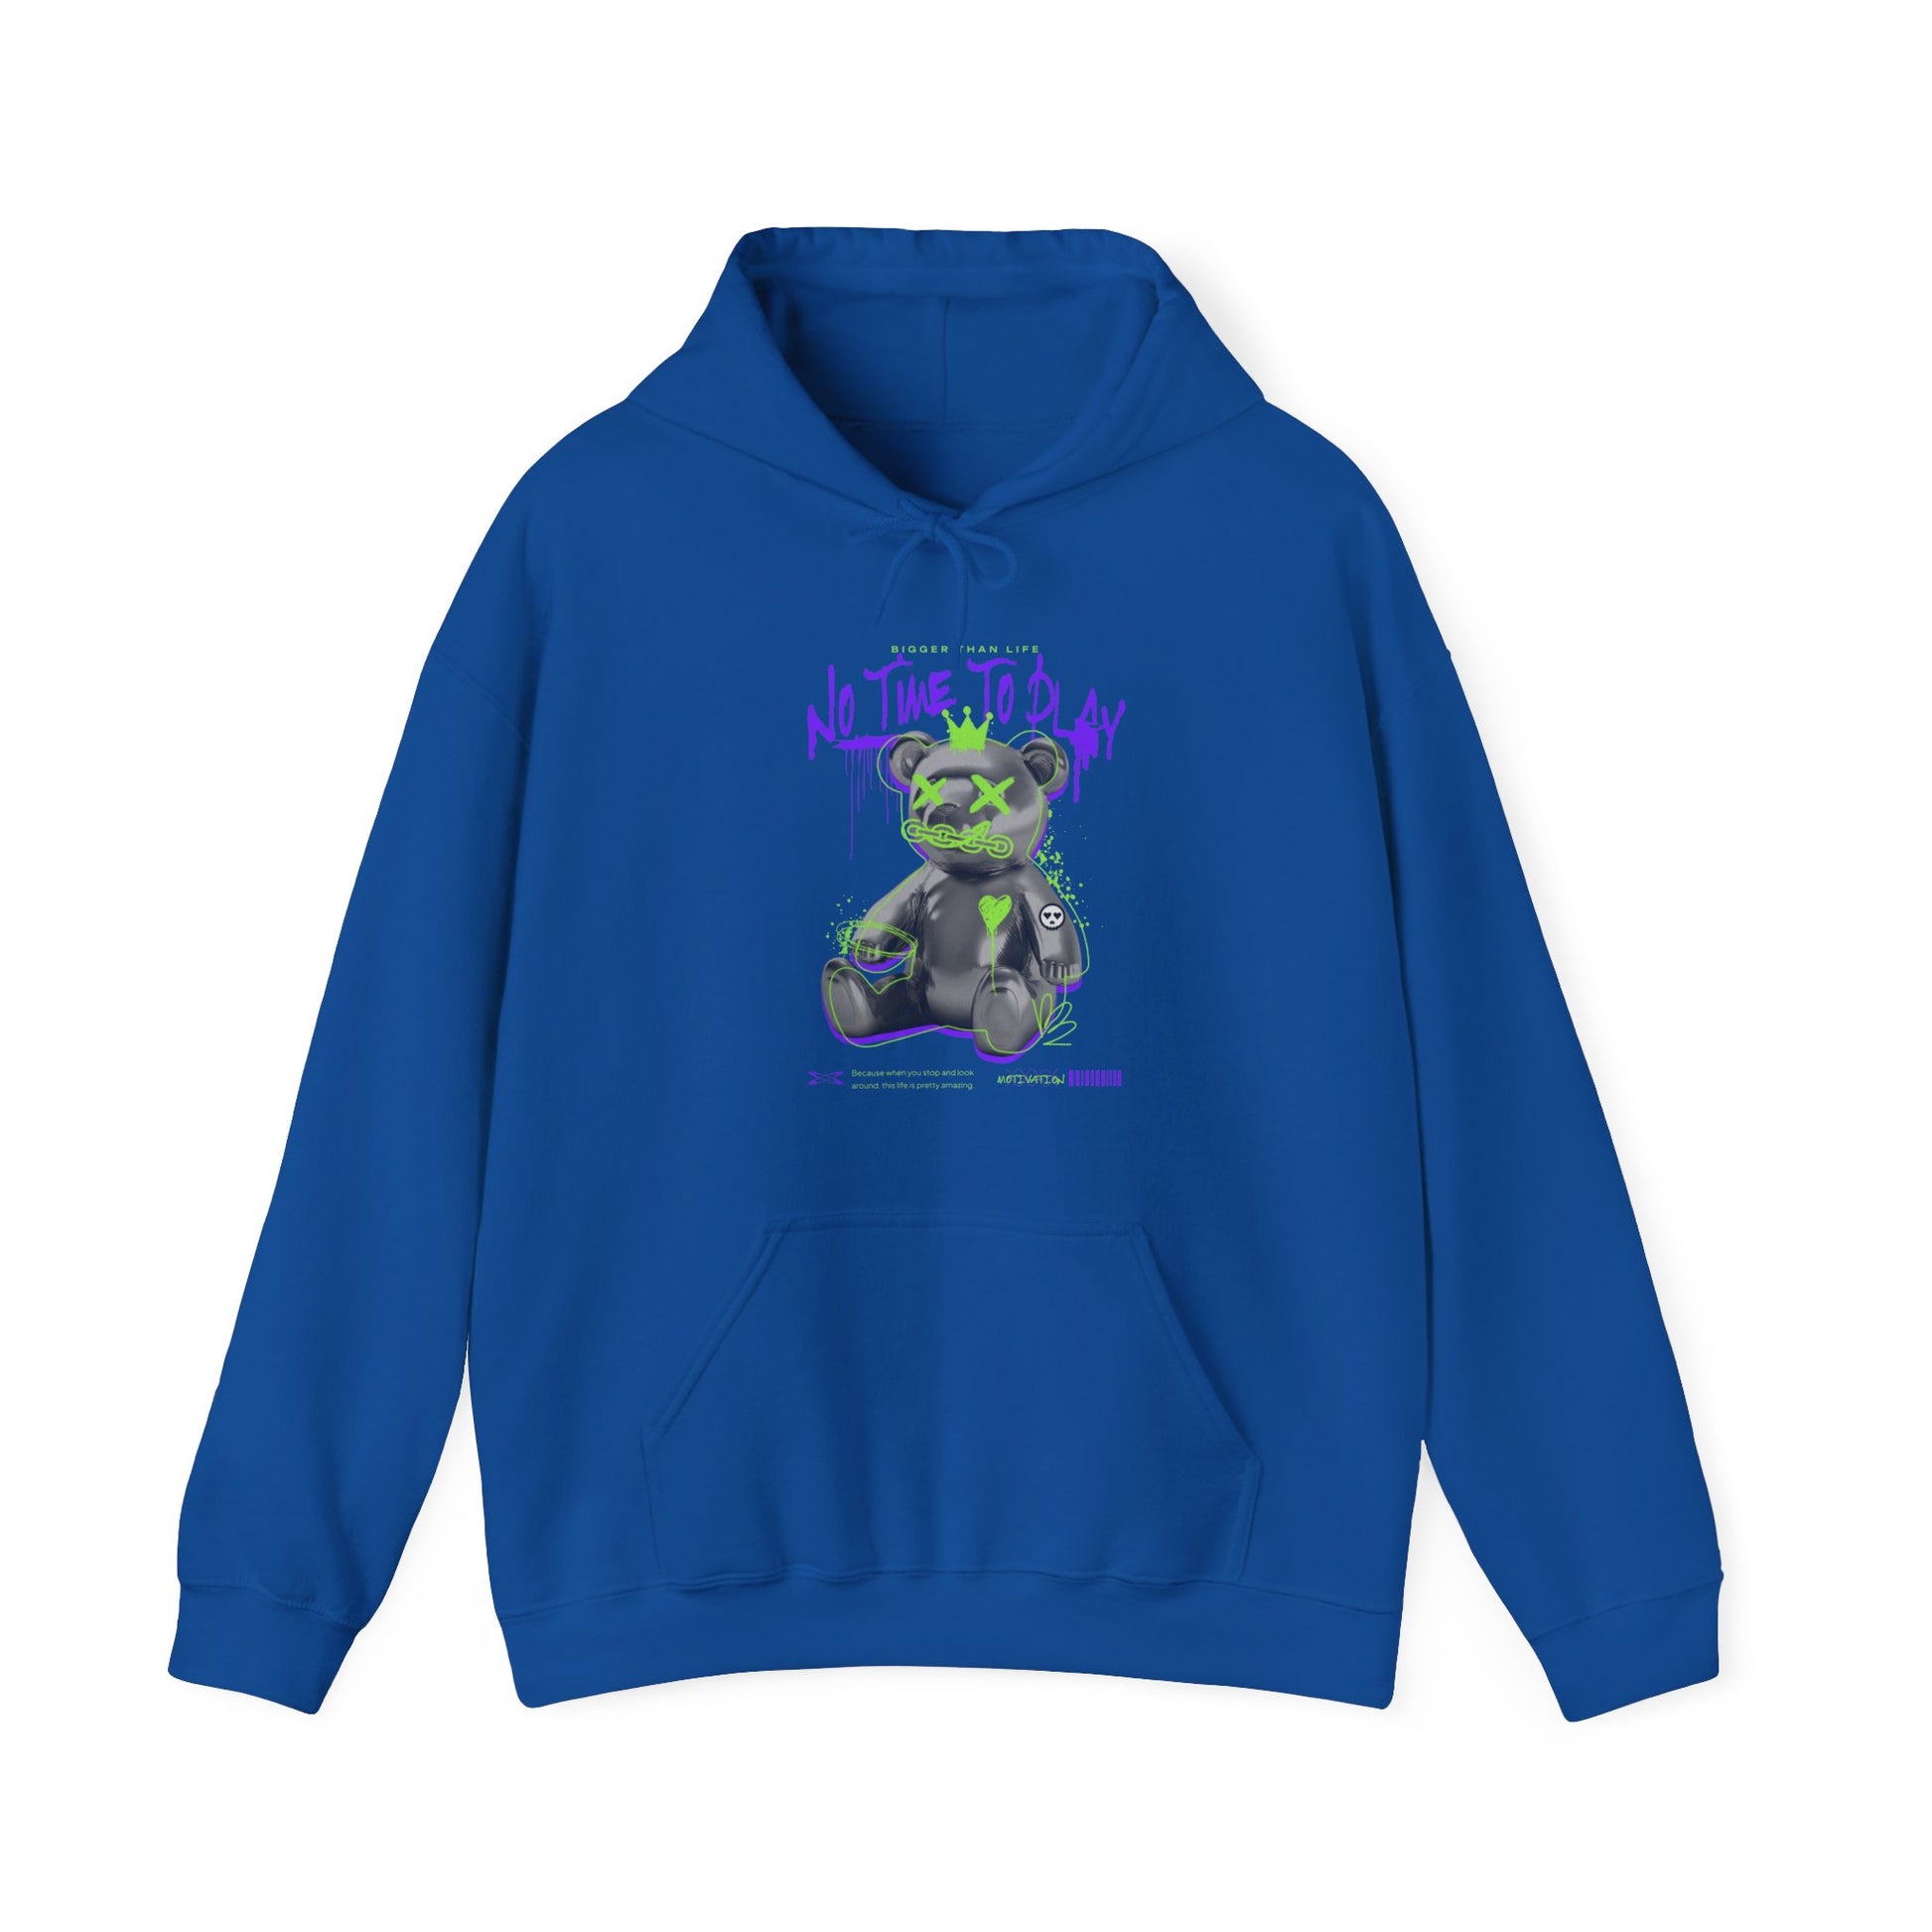 Bold and cozy hoodie featuring a motivational bear, a true statement piece for any wardrobe.